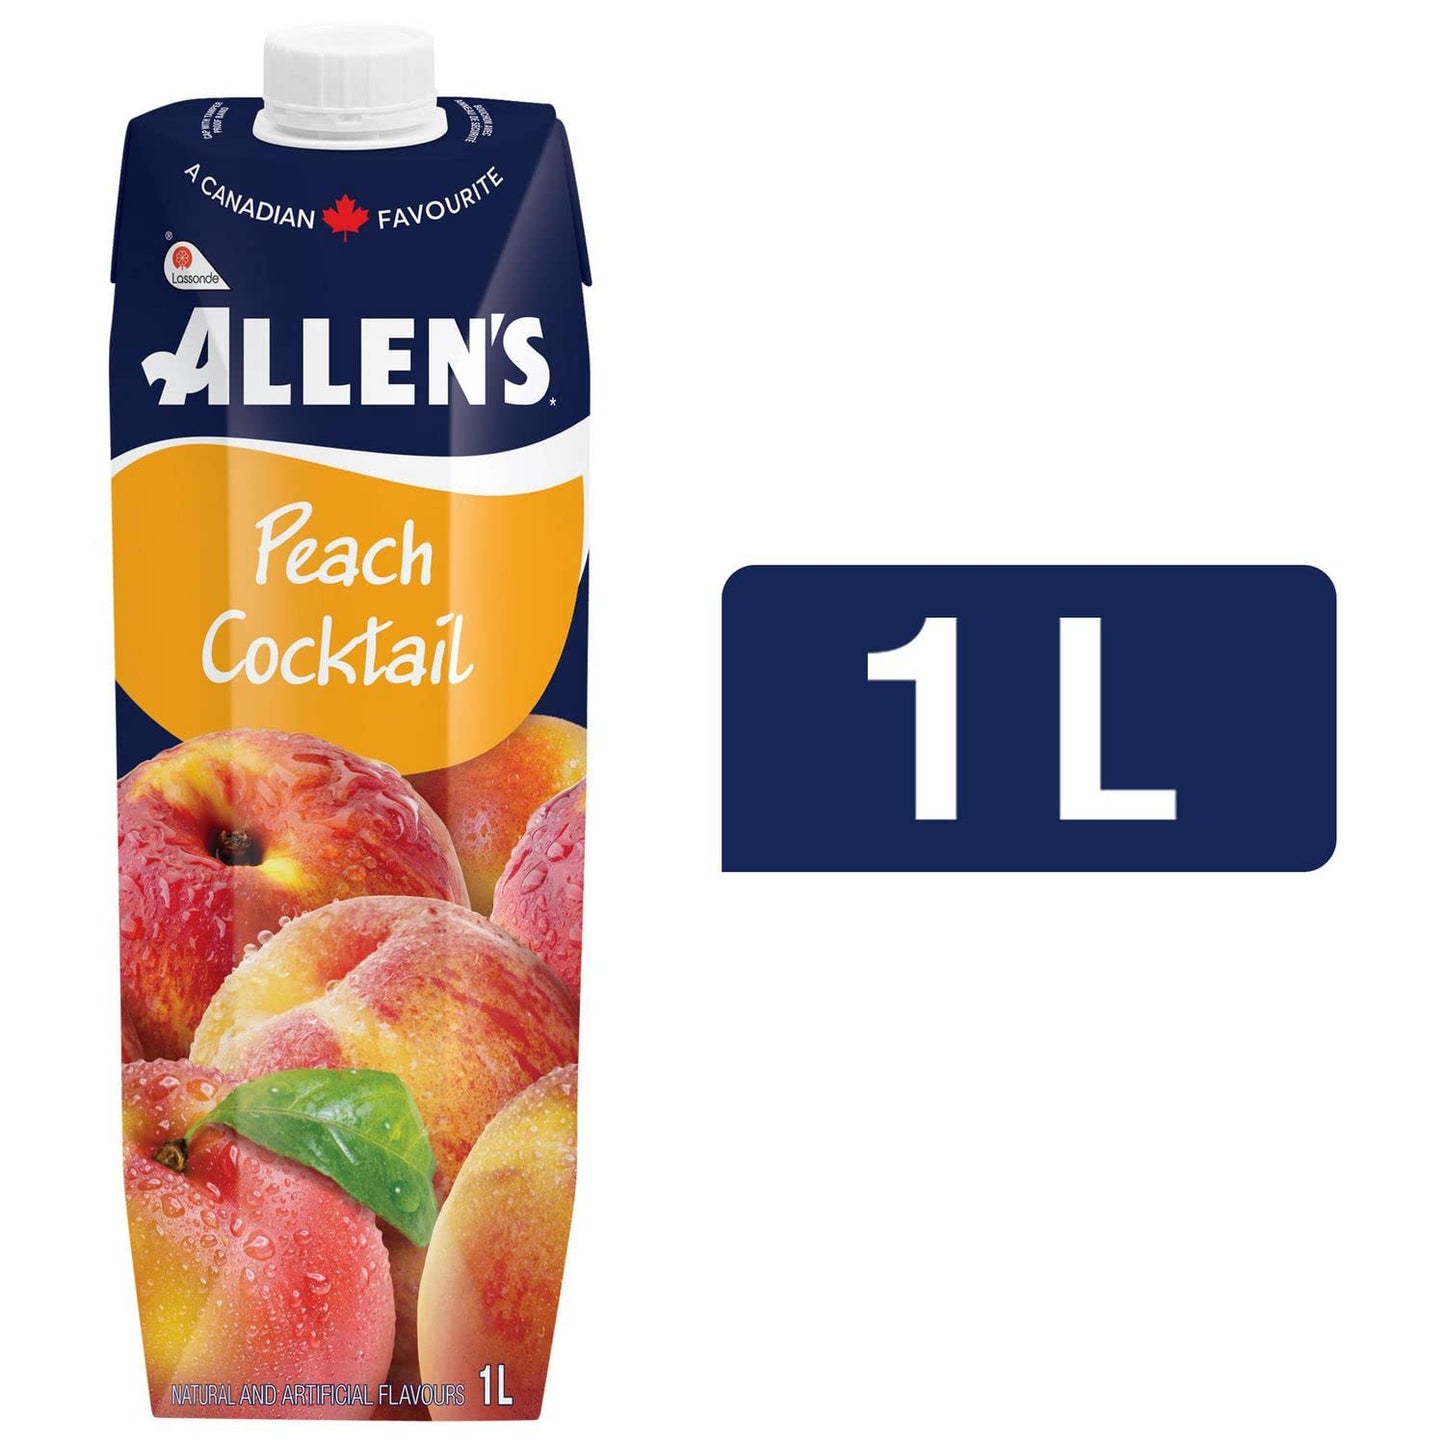 Allens Peach Cocktail Juice 1L/33.8fl.oz (Shipped from Canada)